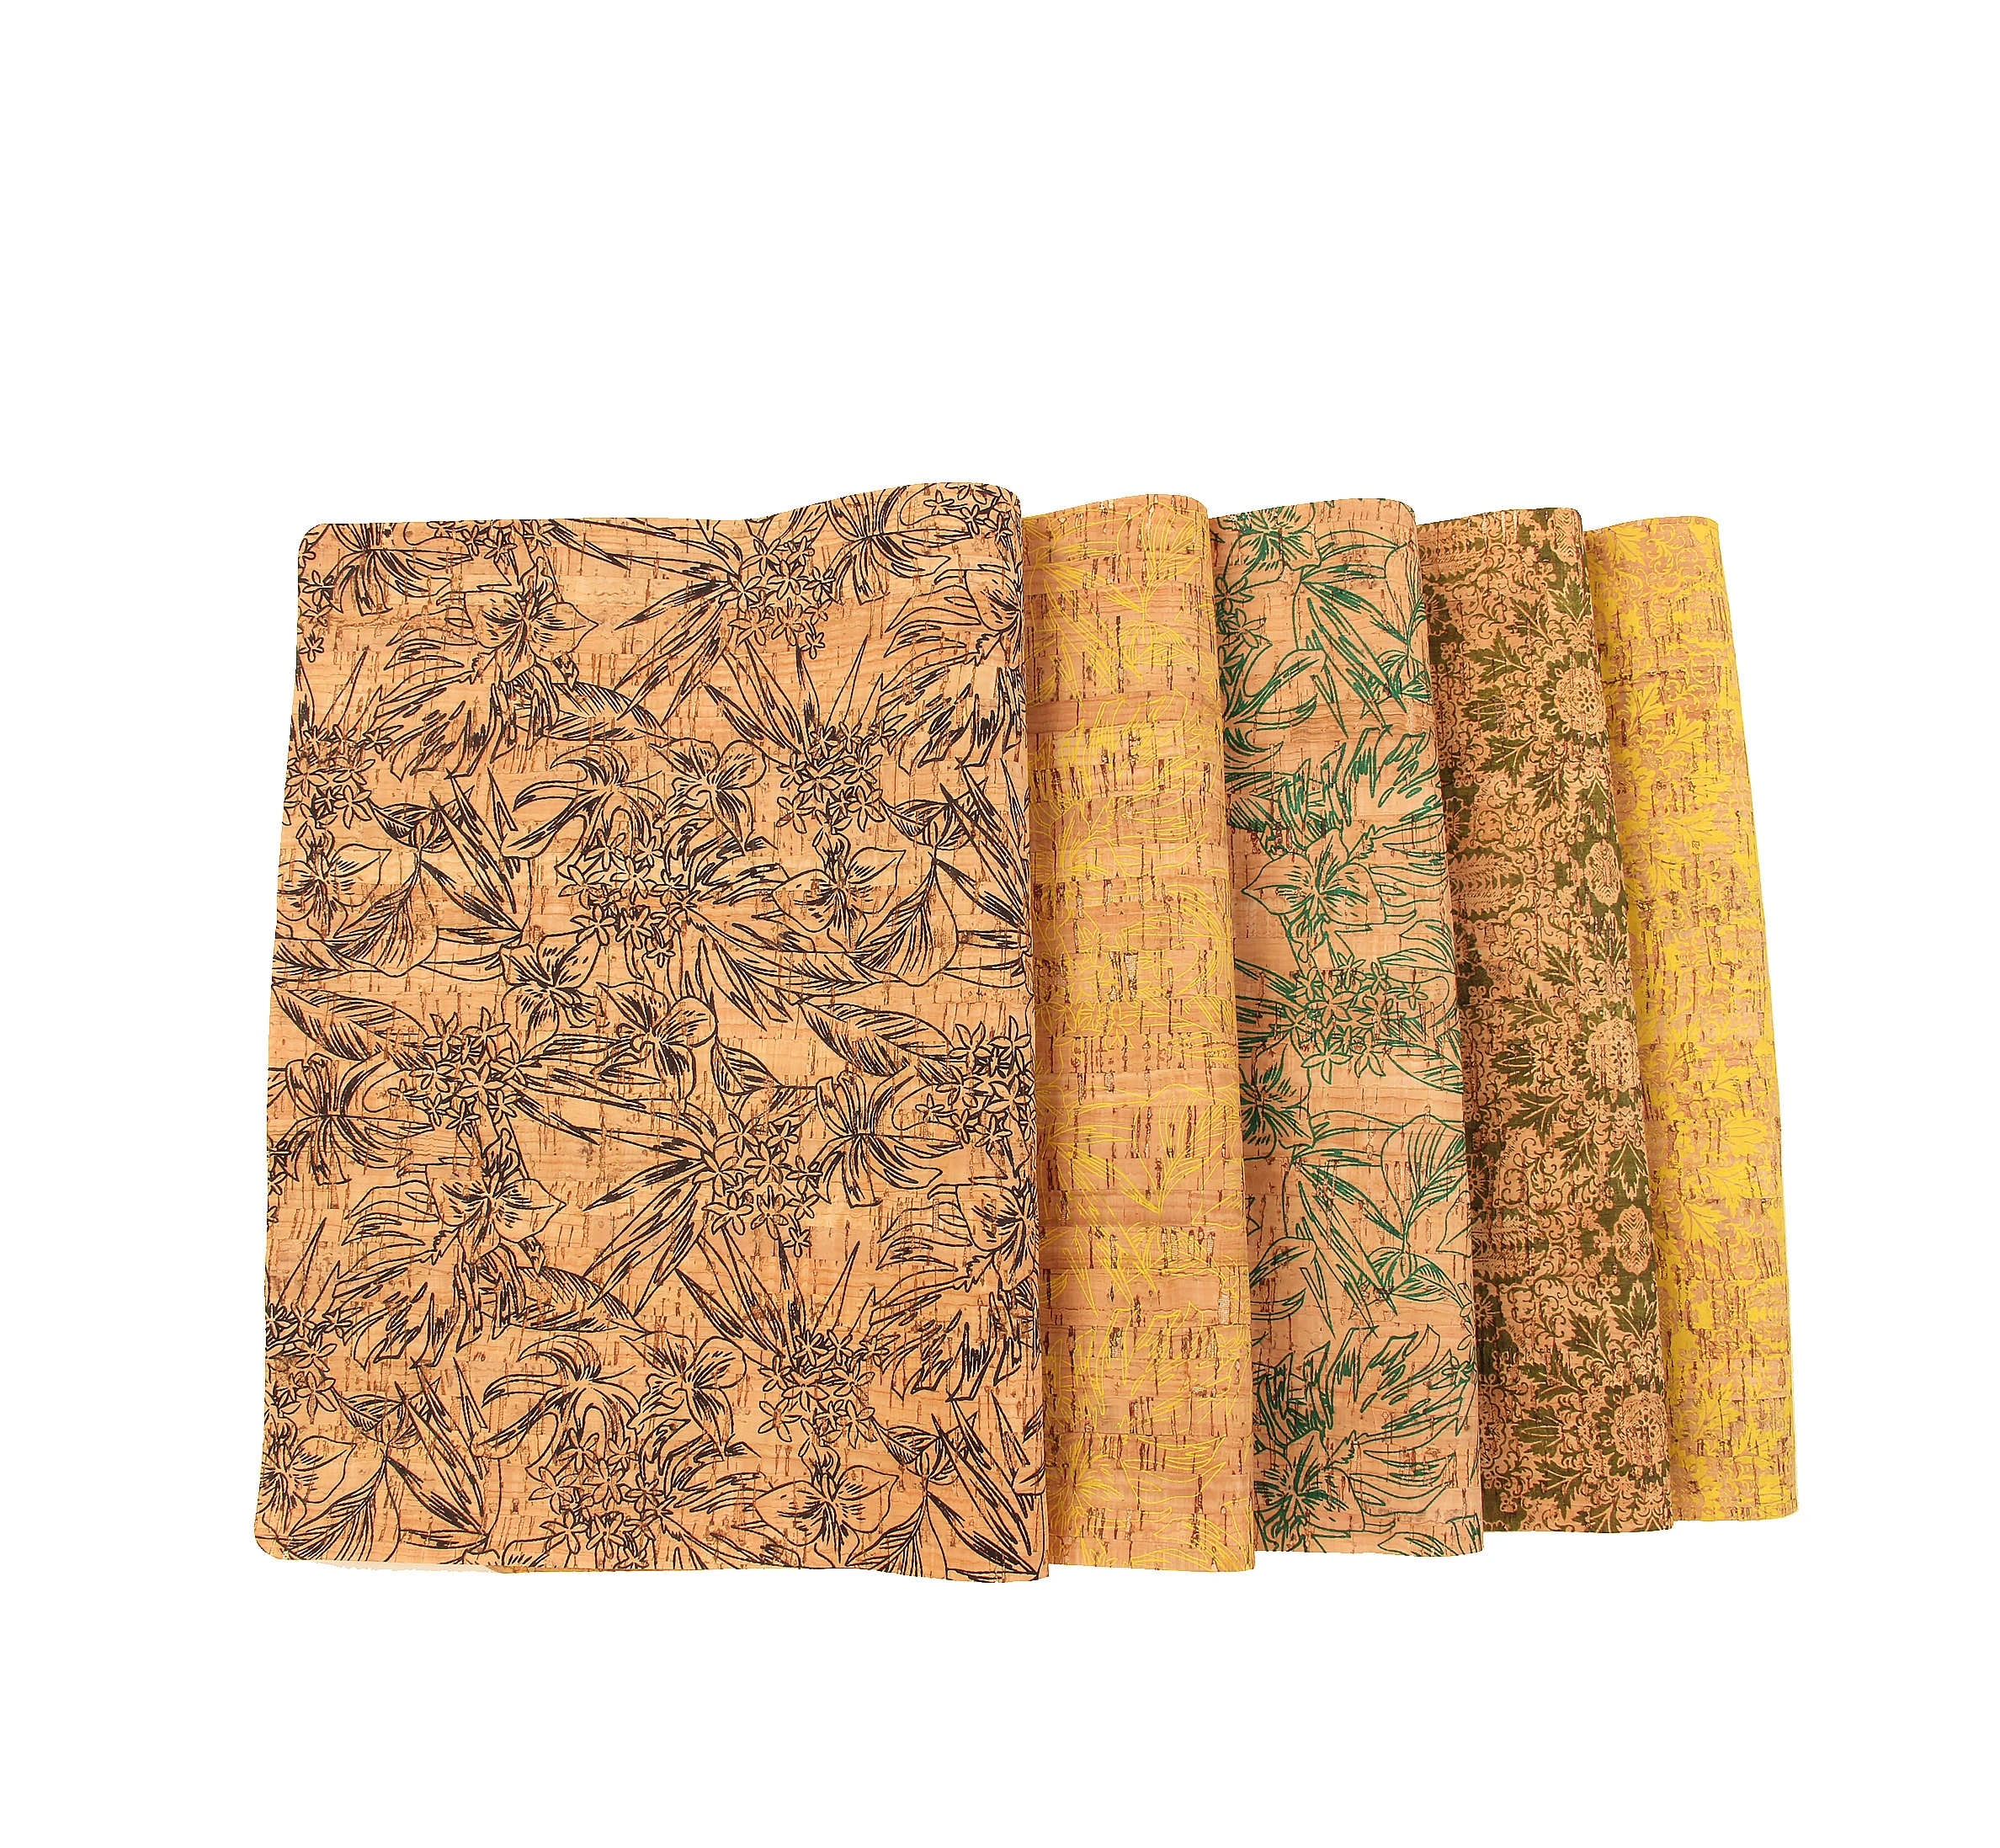 45*30CM black printed cork fabric leather sheet for wallpaper bags box packaging suit toy mat belt